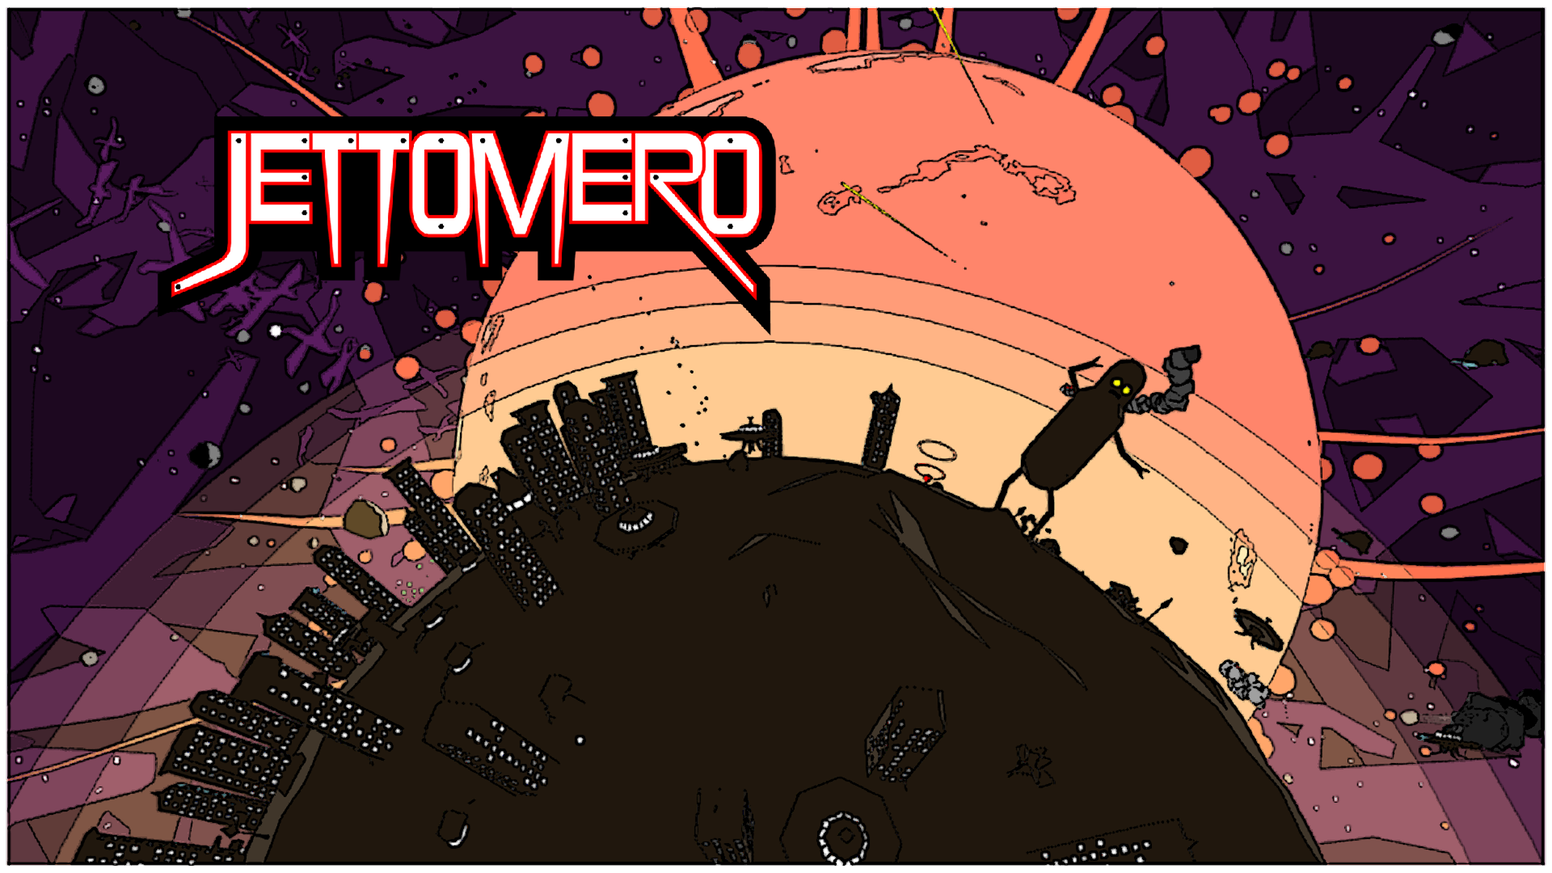 Indie Discovery Podcast # 6: Interview with Developer, Gabriel Koenig, discussing his indie game Jettomero: Hero of the Universe